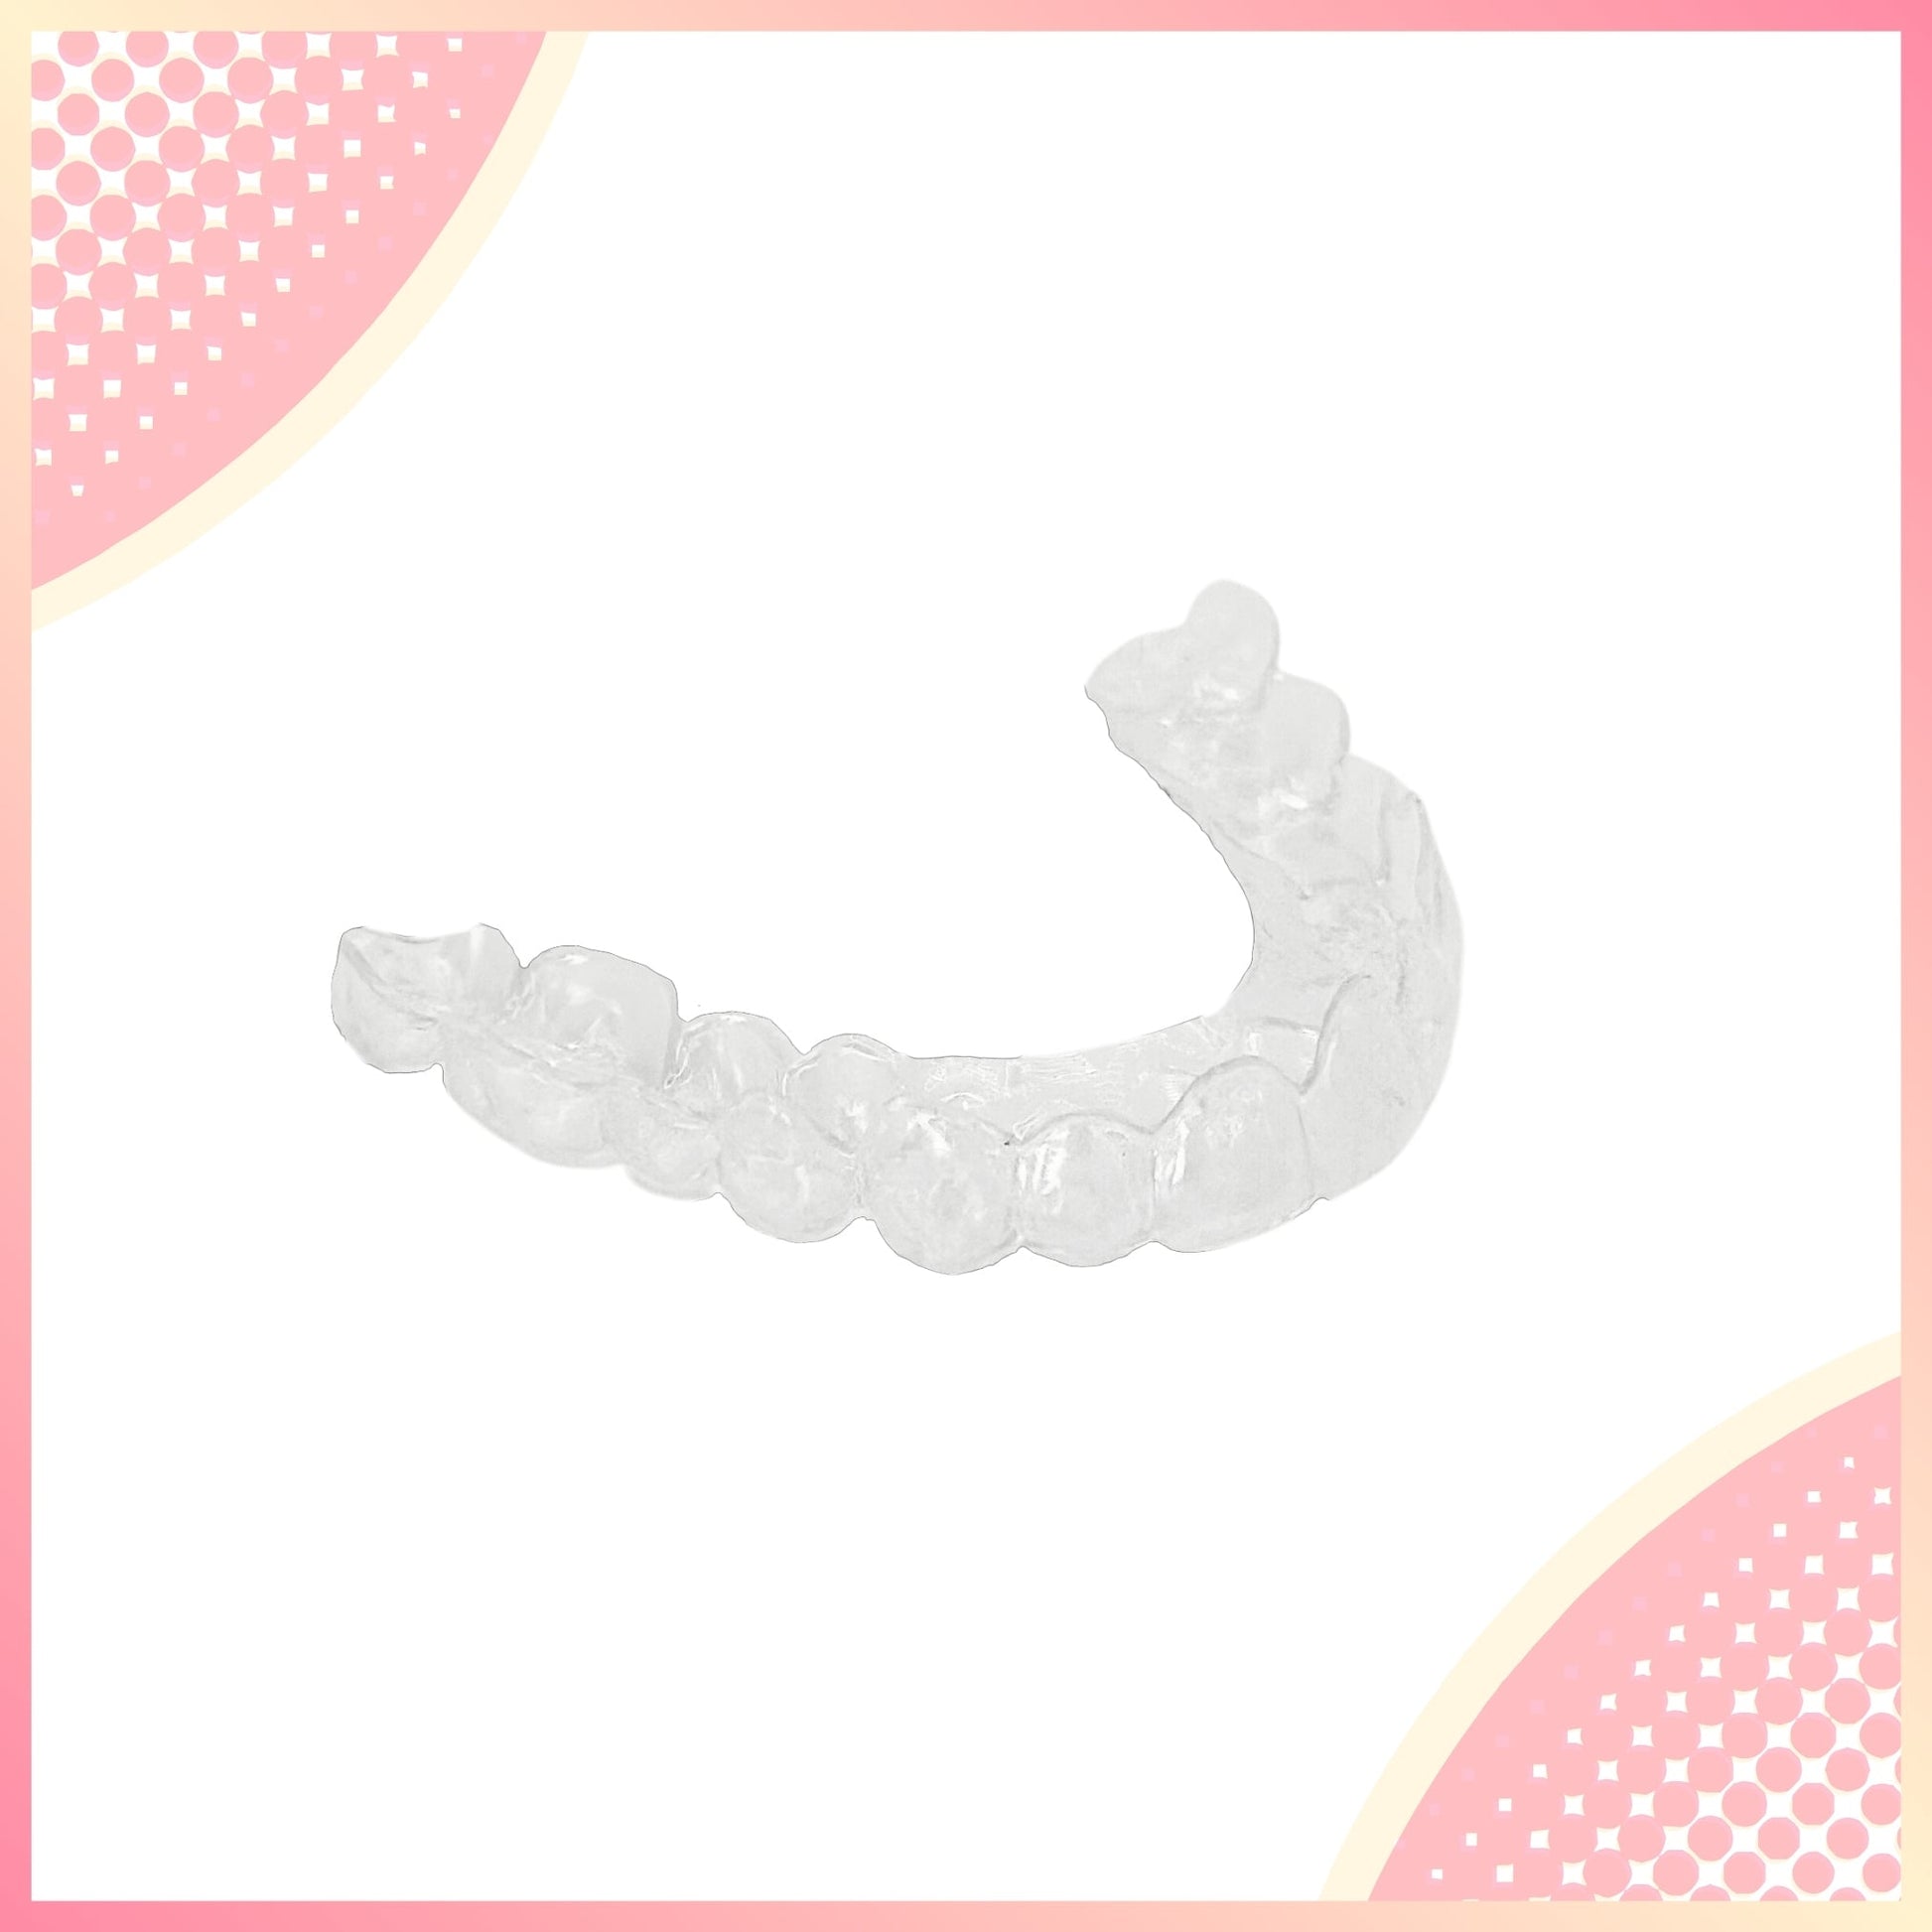 After Braces / Invisalign Retainers - Smile Boutique NY